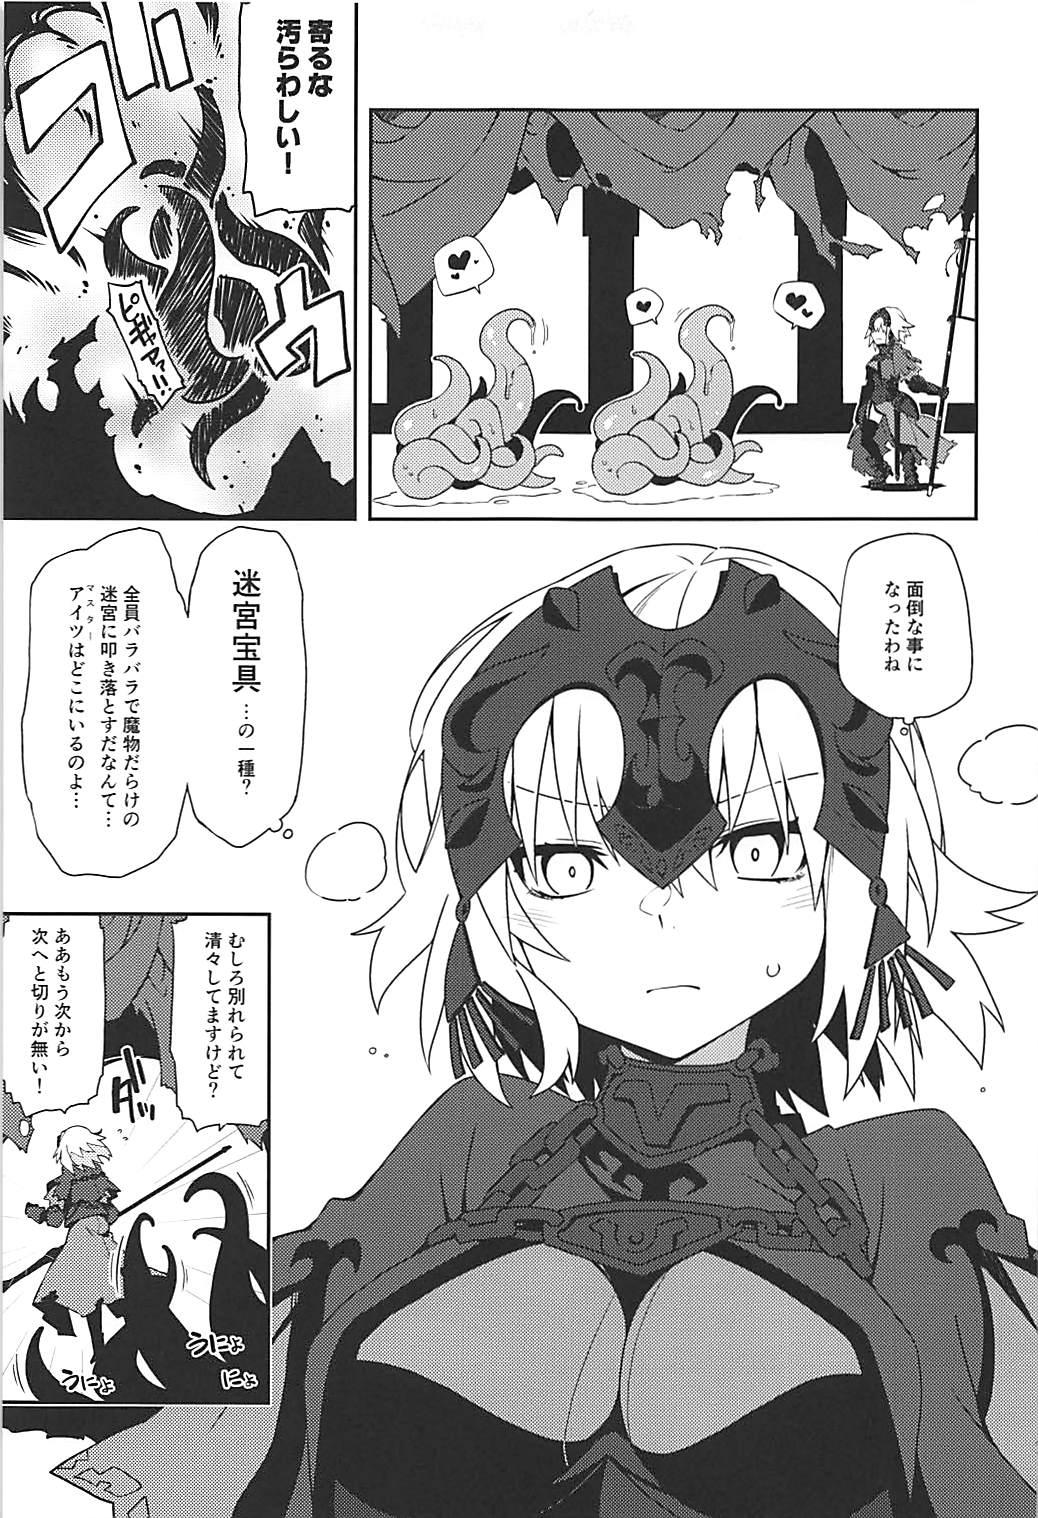 Interacial Hougu Ero Trap Dungeon - Fate grand order Trans - Page 4